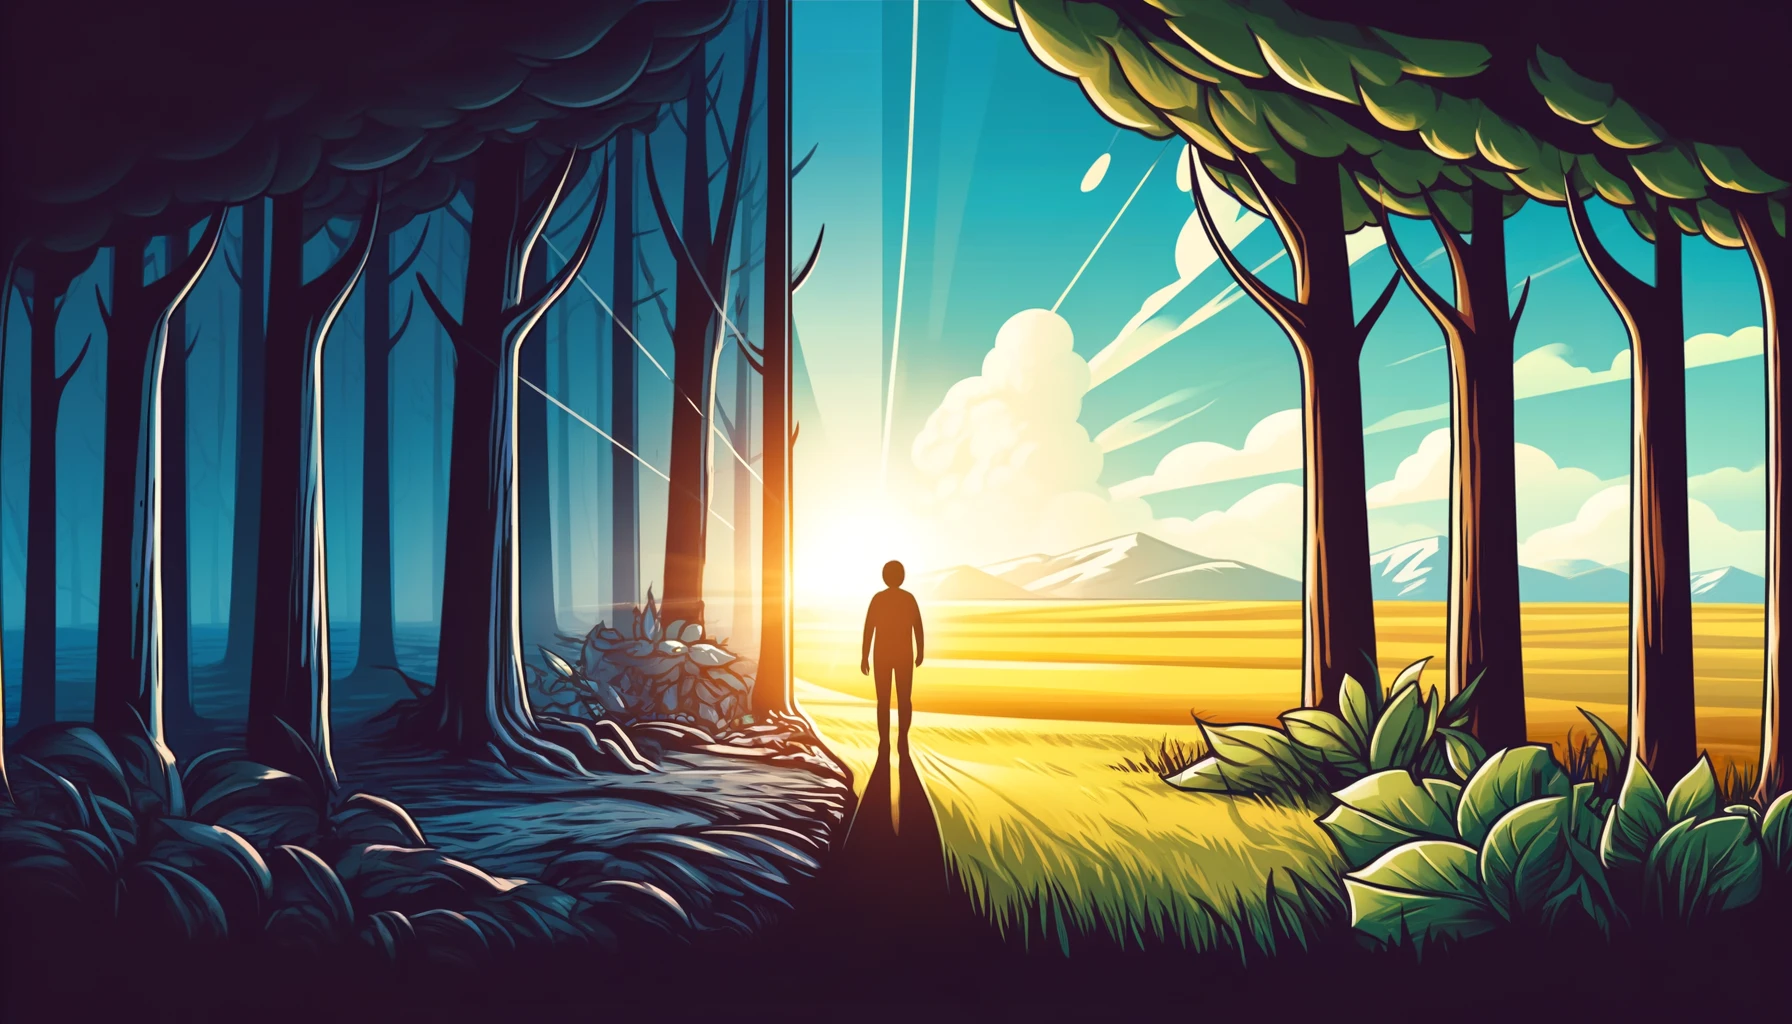 illustrate the concept of personal growth and honesty in recovery. The image should depict a person standing at the edge of a forest, looking out towa